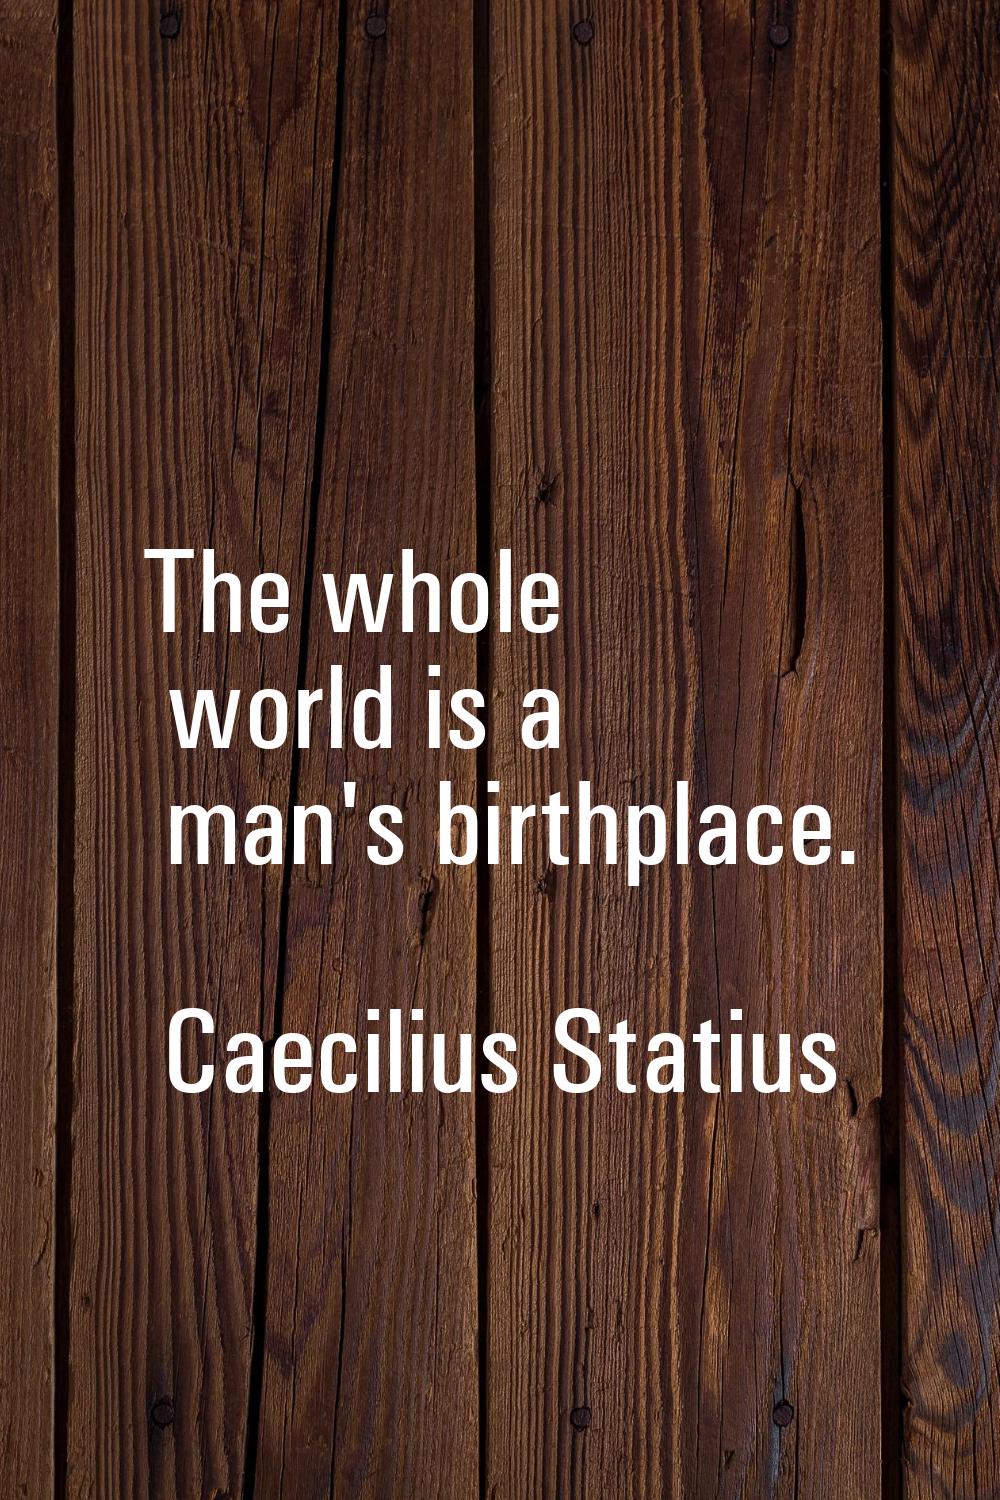 The whole world is a man's birthplace.